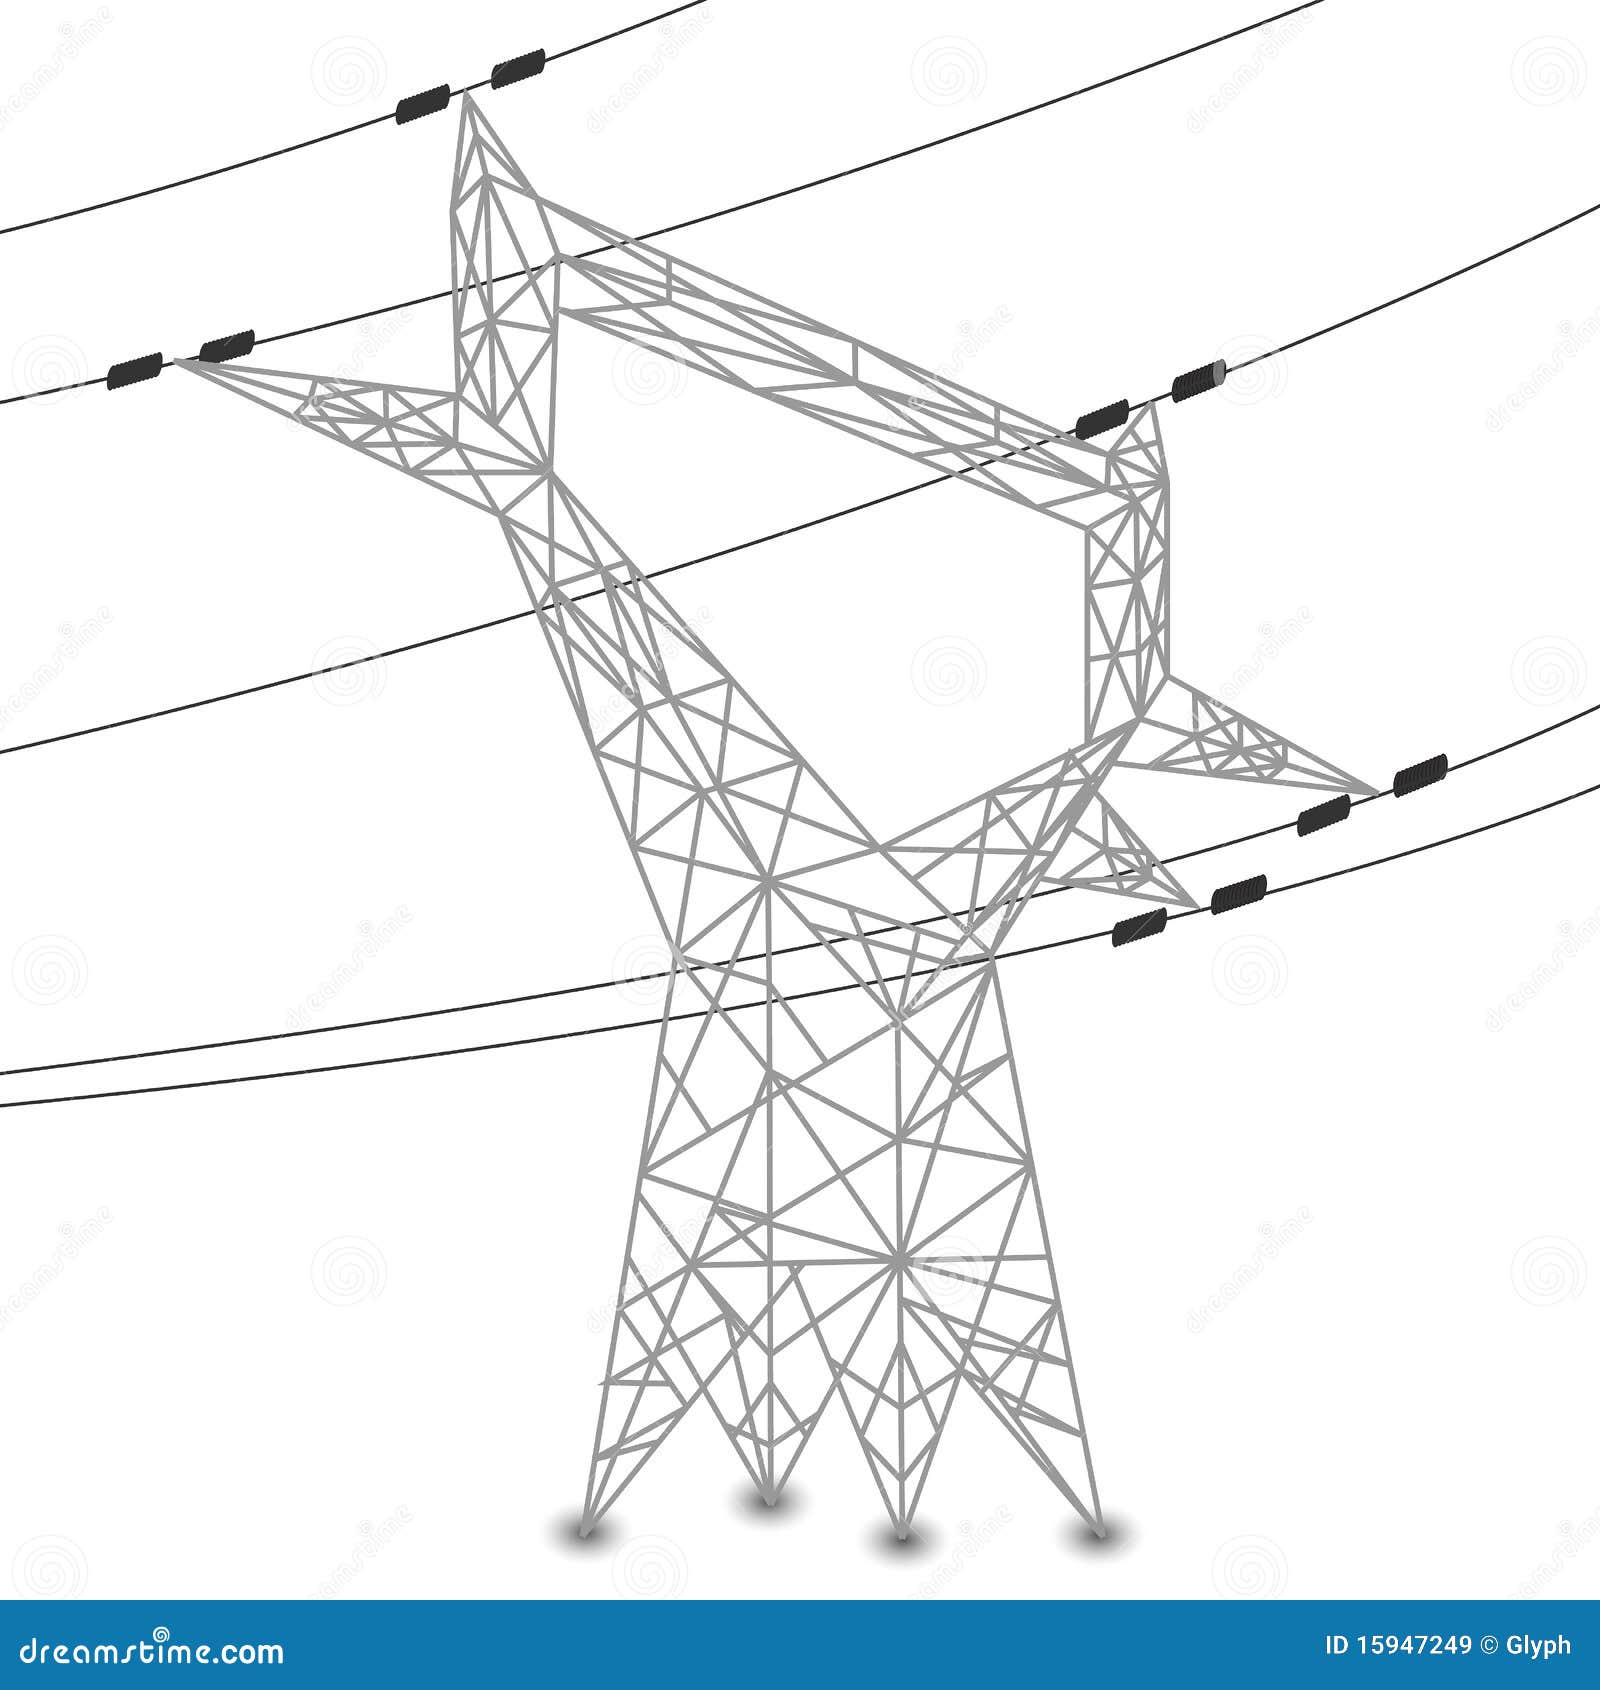 silhouette of power lines and electric pylon